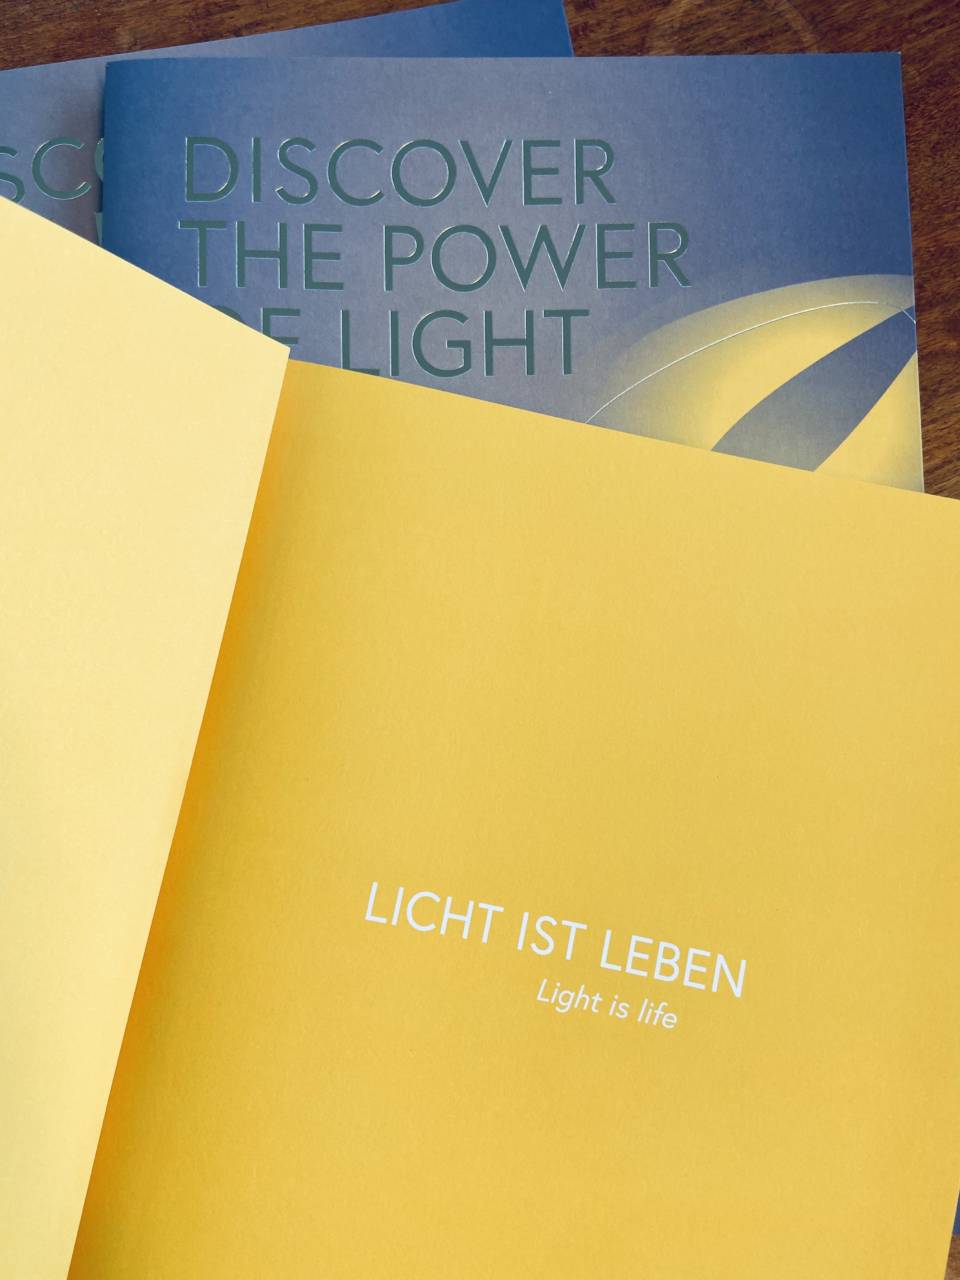 lichtbasis: Discover the power of light